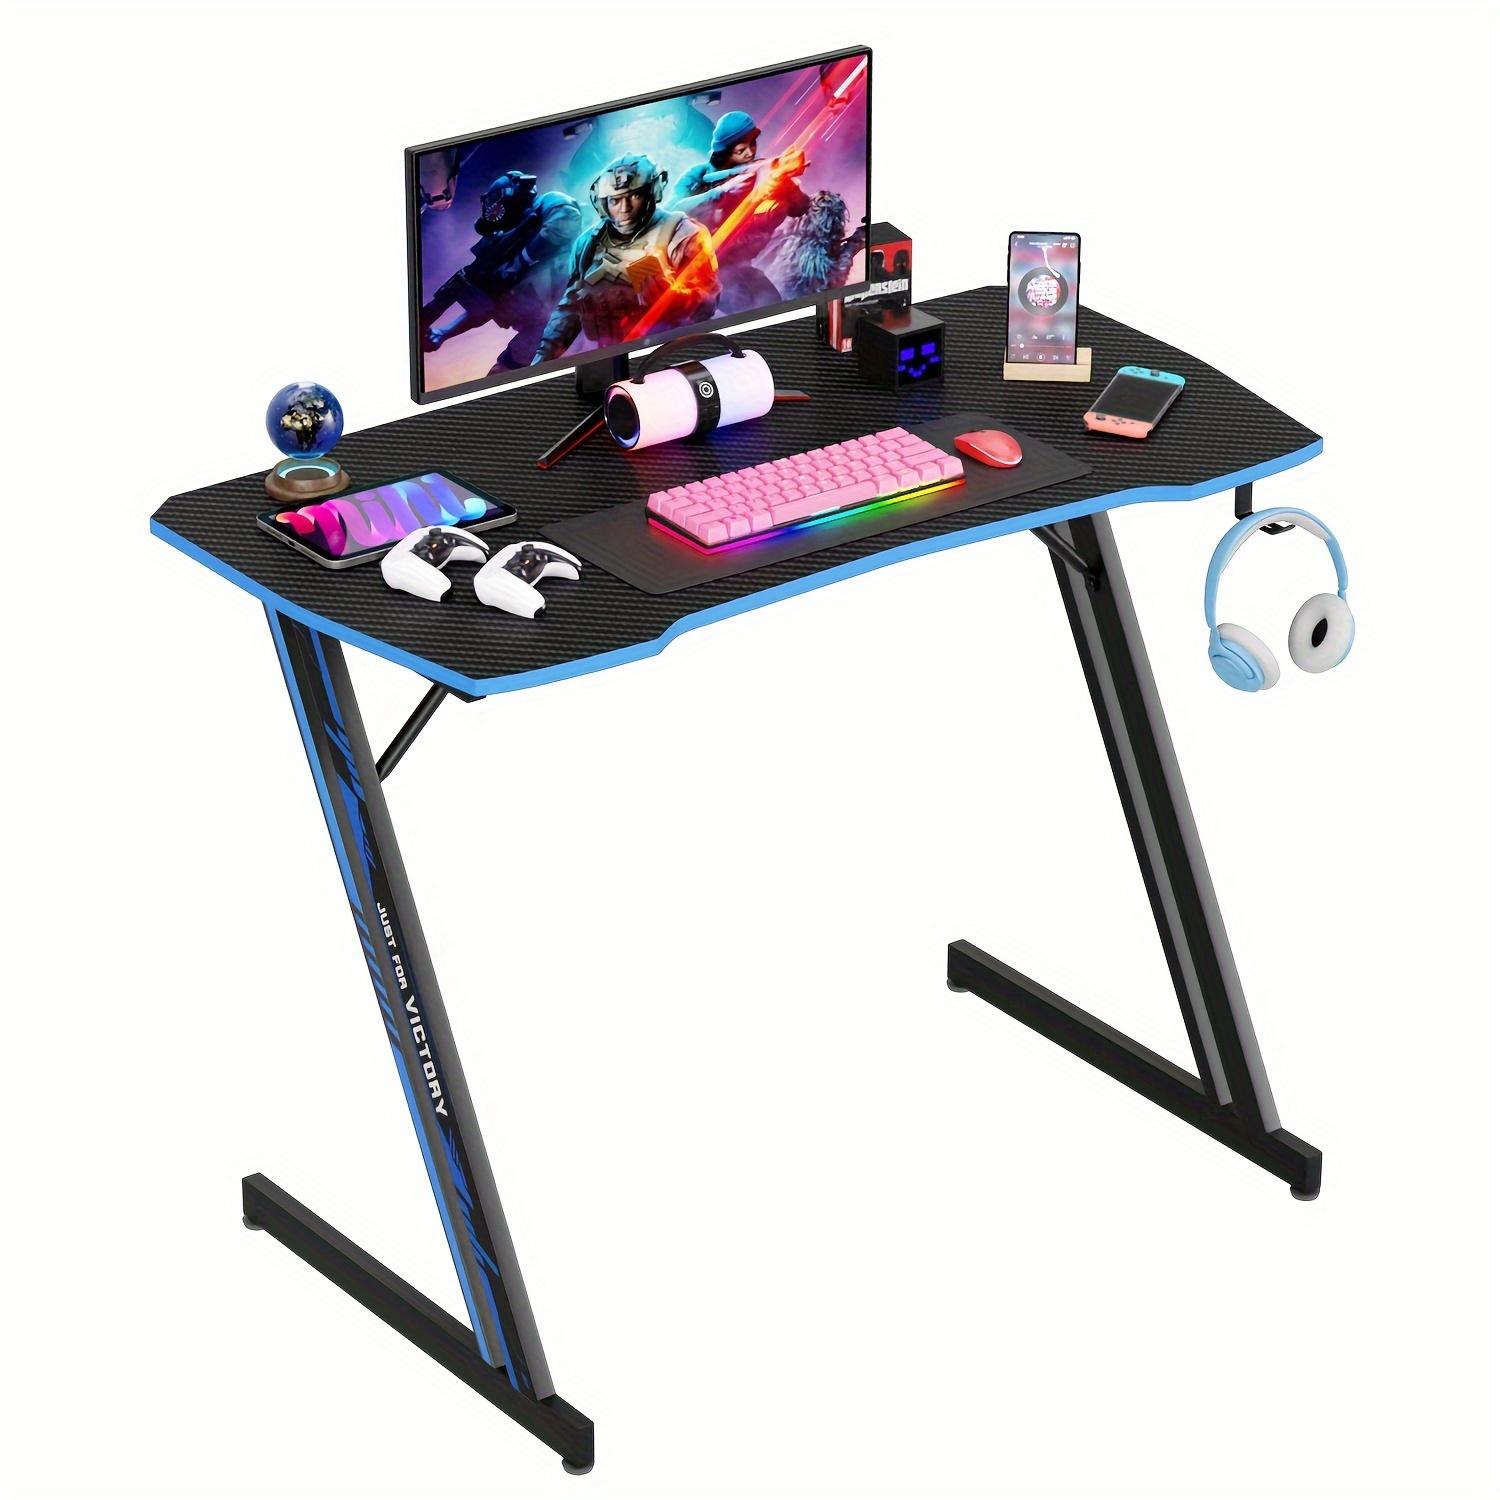 

Modern 39 Inch Z-shaped Computer Desk For Home Office With Headphone Hook - Sturdy Workstation Table With Spacious Desktop, Blue